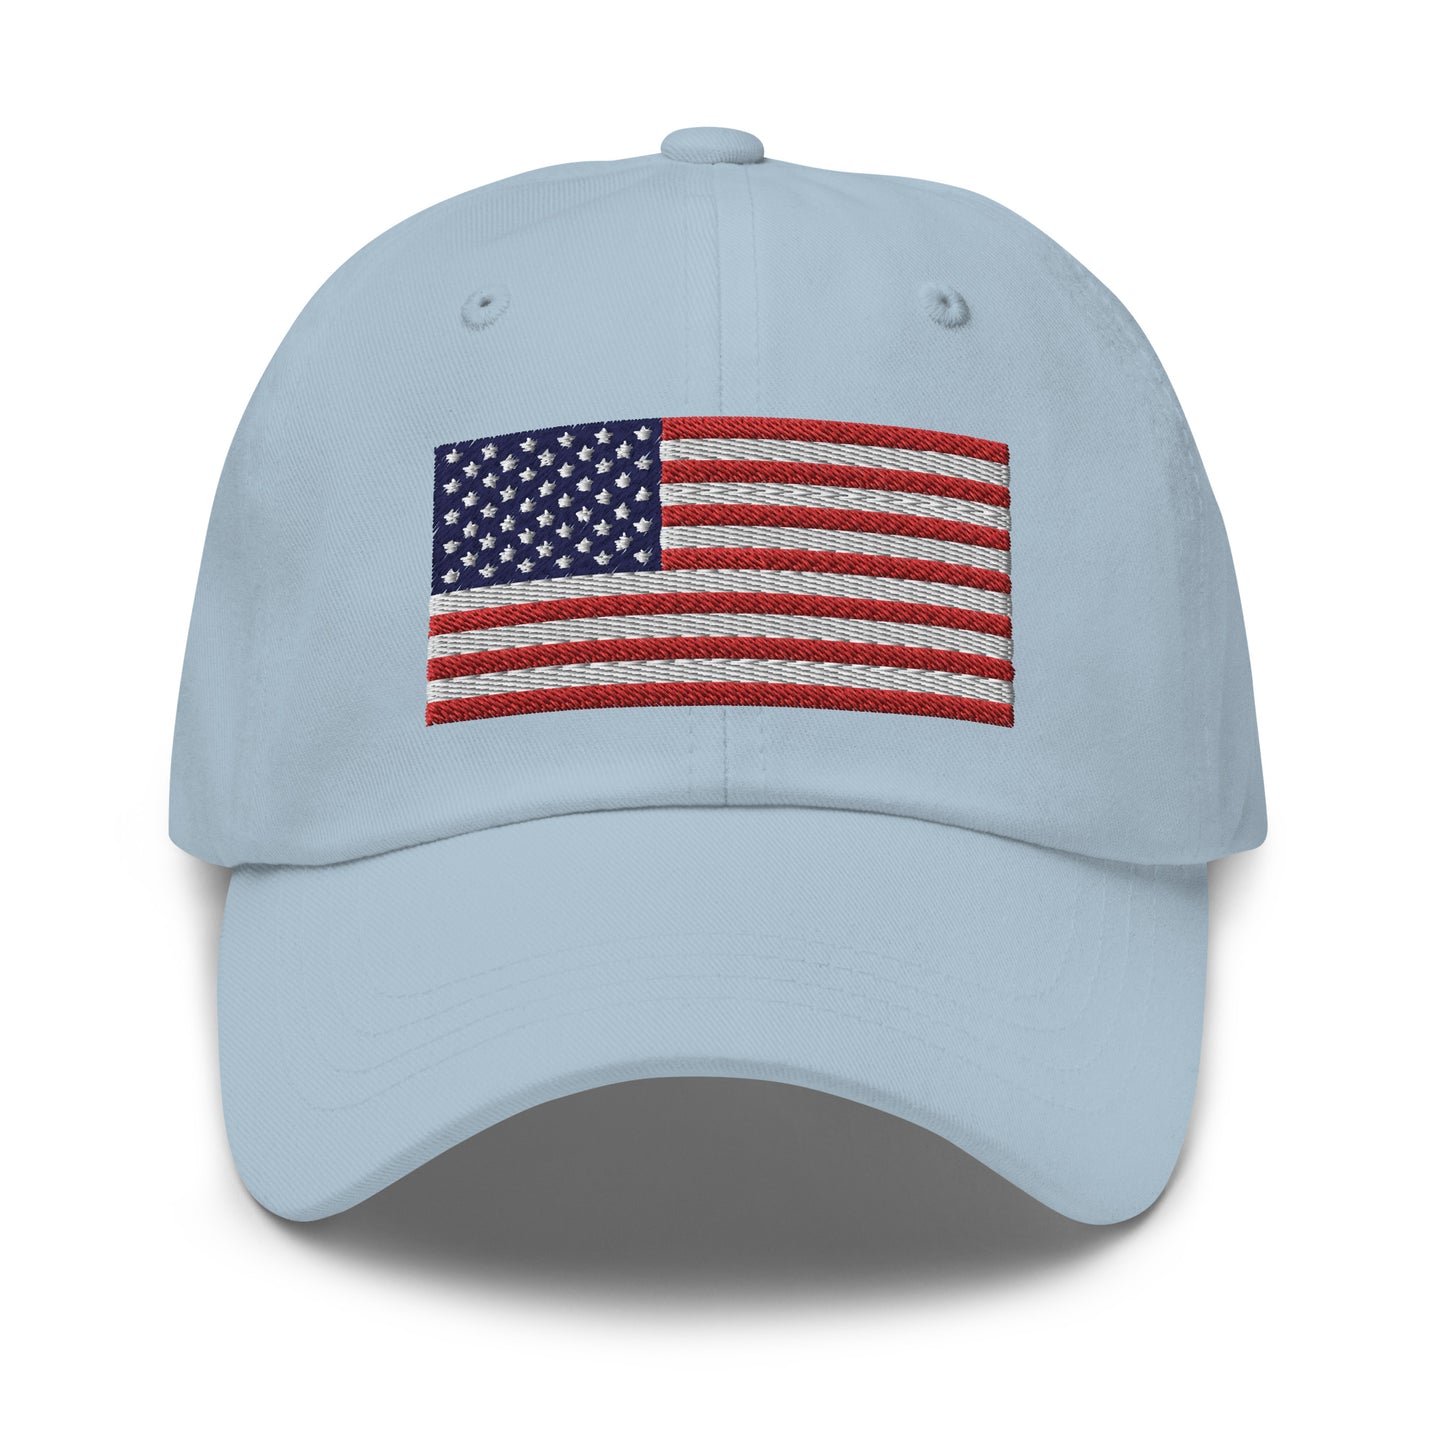 Light blue dad hat with embroidered USA design